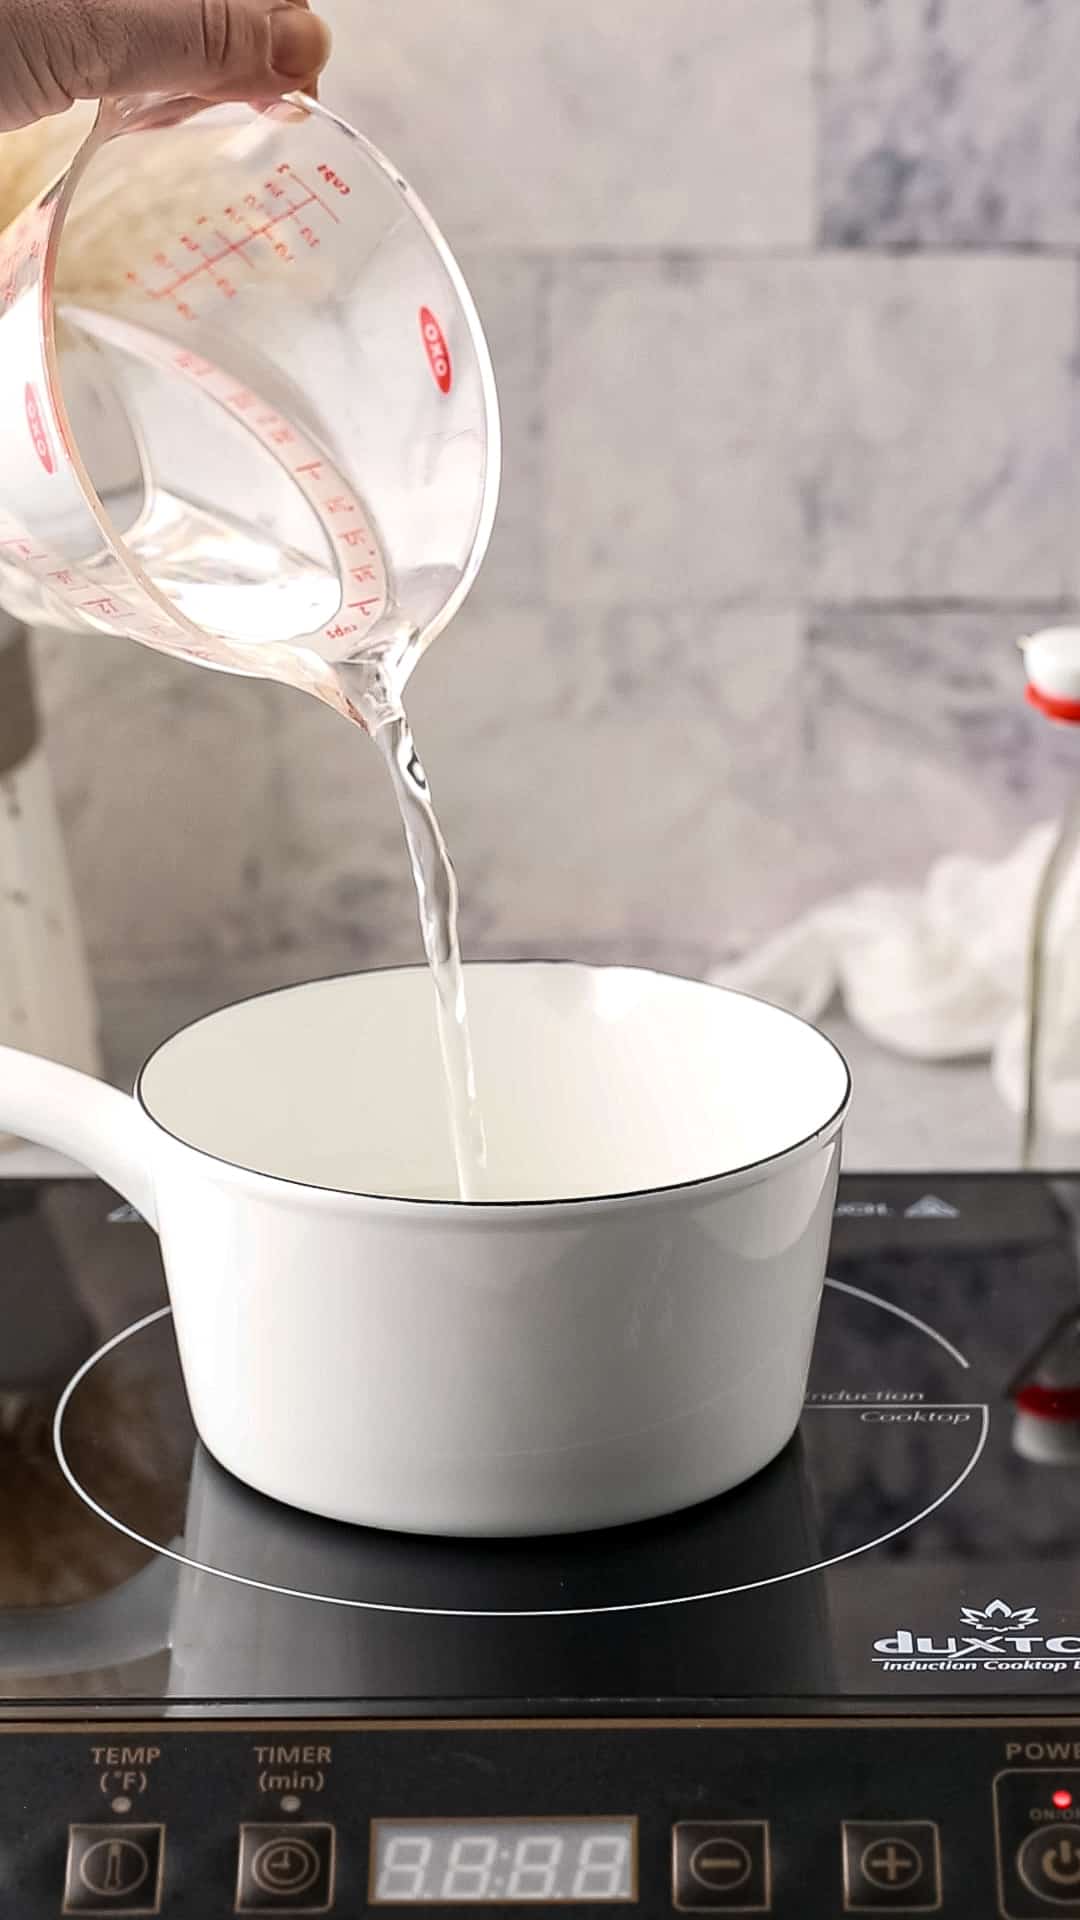 Water being poured from a measuring cup into a white saucepan. The saucepan is on an induction burner.